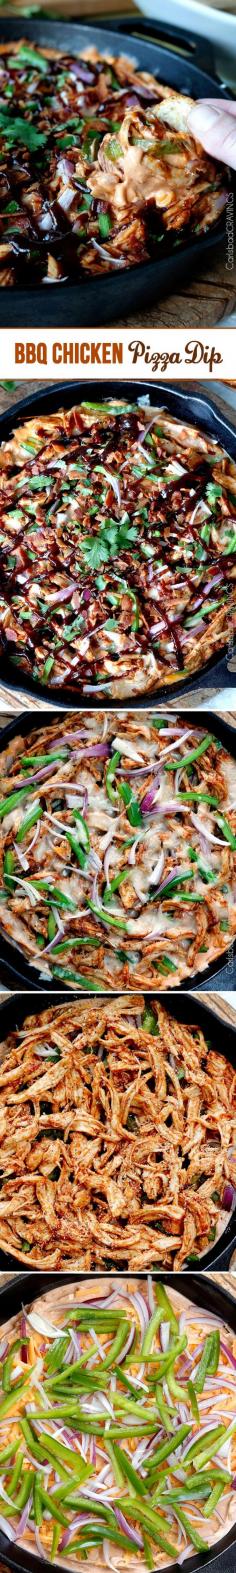 
                    
                        Everyone loves this BBQ Chicken Pizza Dip! - cheesy BBQ cream cheese with layers of BBQ chicken, red onions, bell peppers and mozzarella - all the flavors of the pizza but in a dip!
                    
                